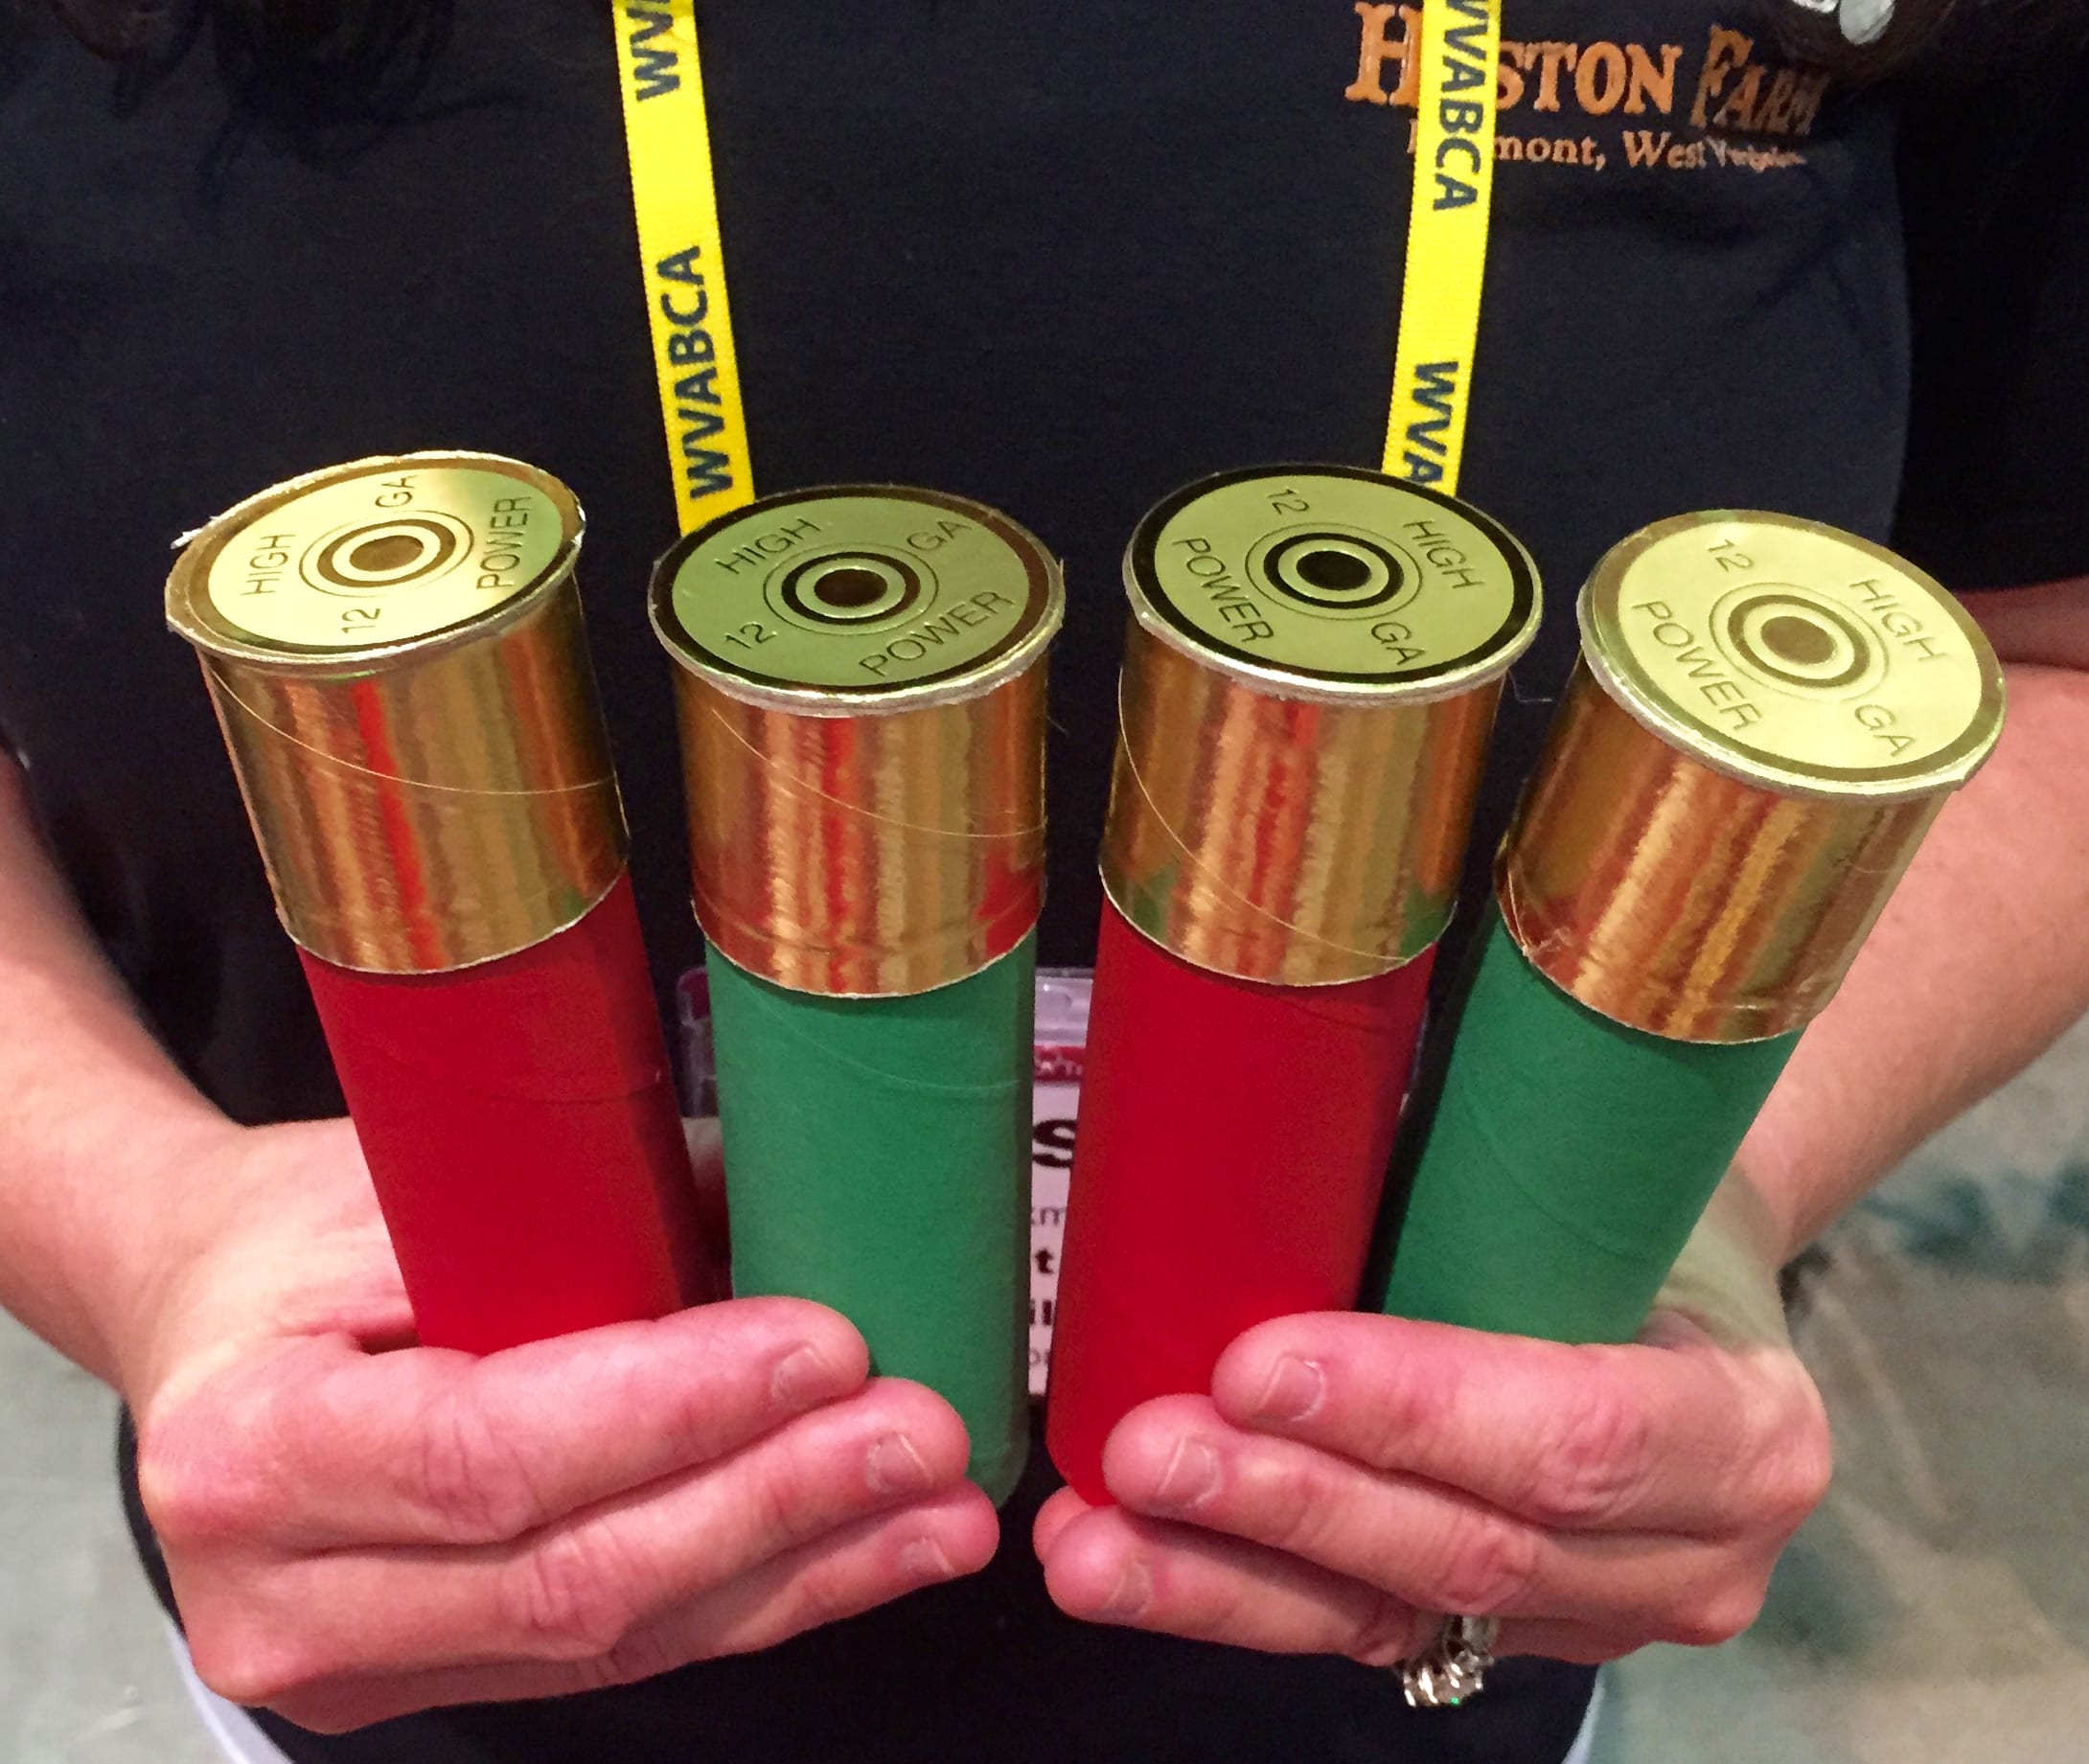 They look like giant 12 gauge shotgun shells. inside each is a surprise fro...